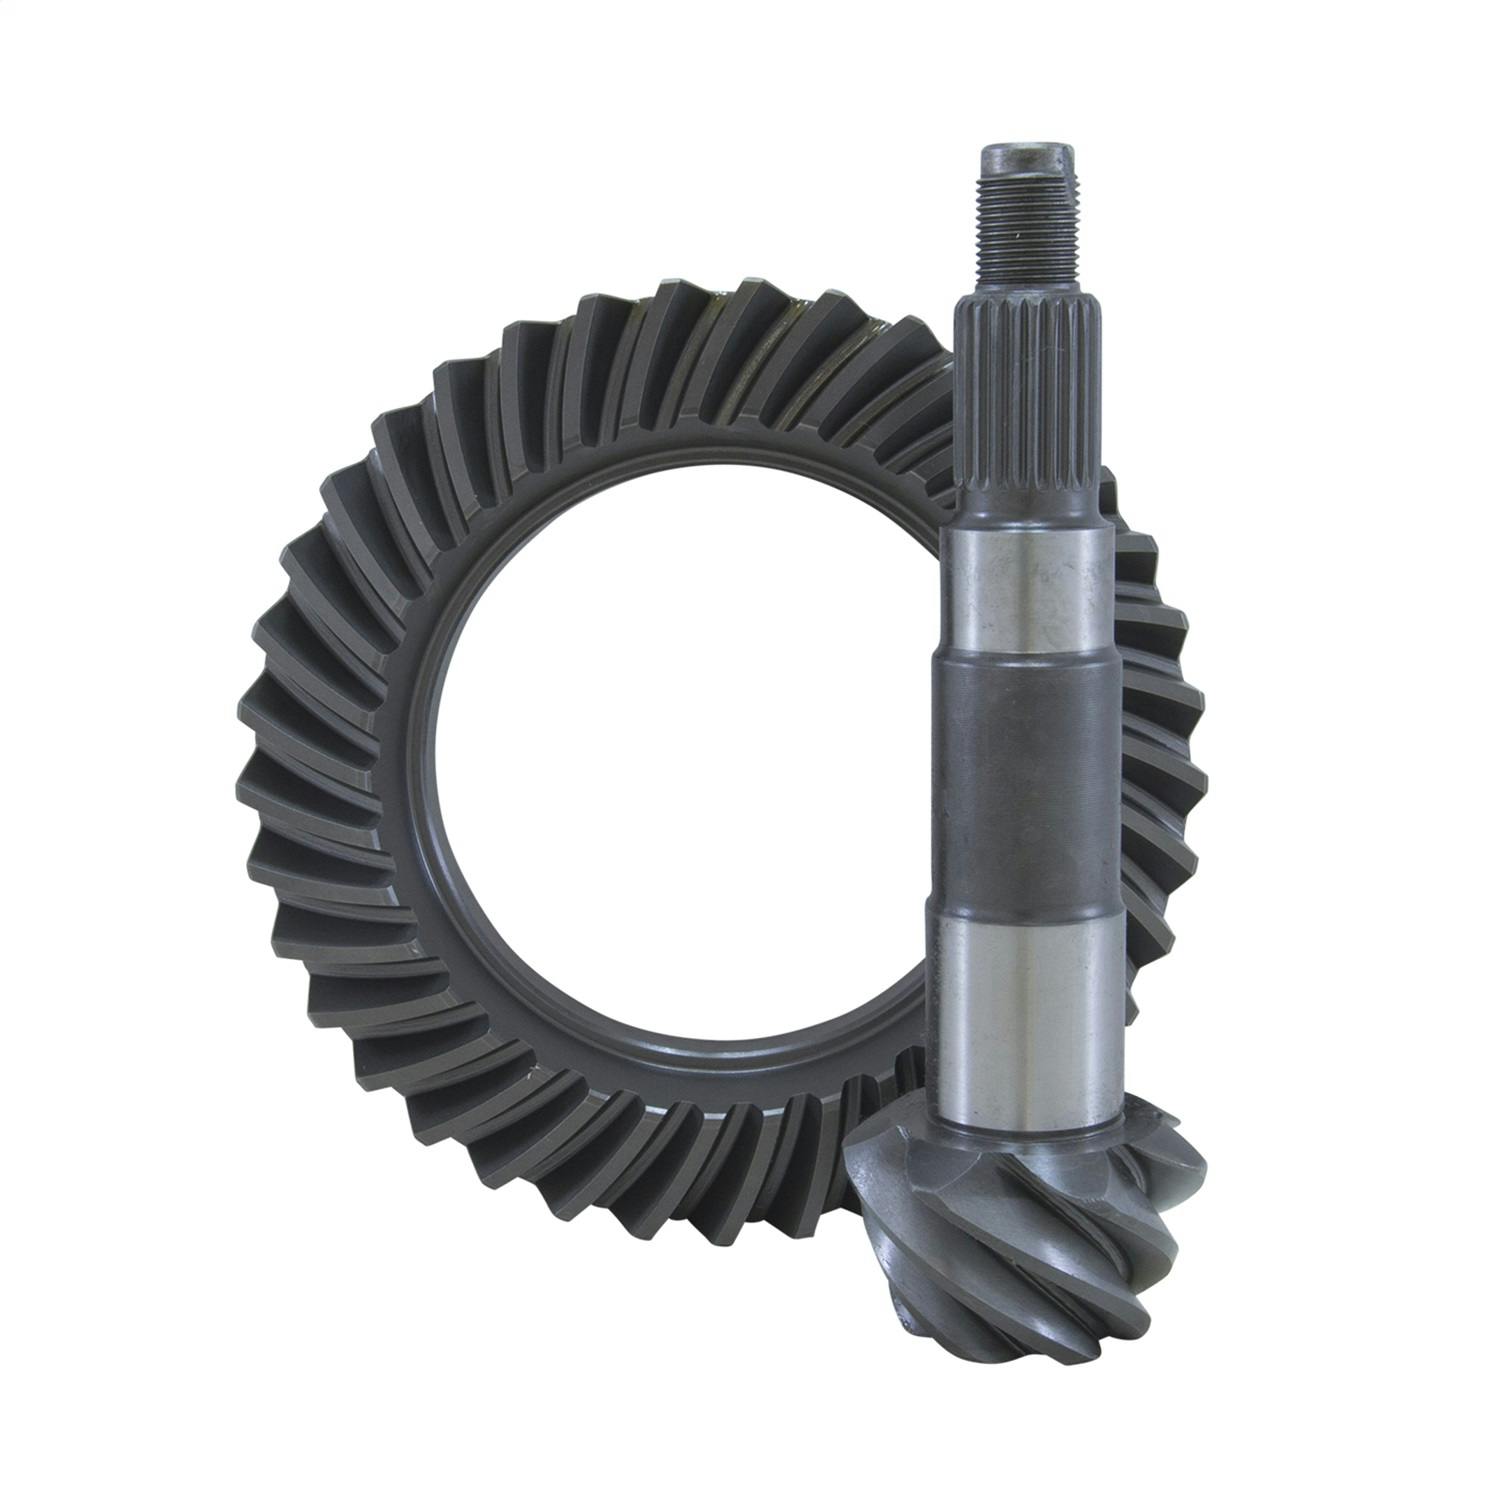 USA Standard Gear ZG T7.5-529 Ring And Pinion